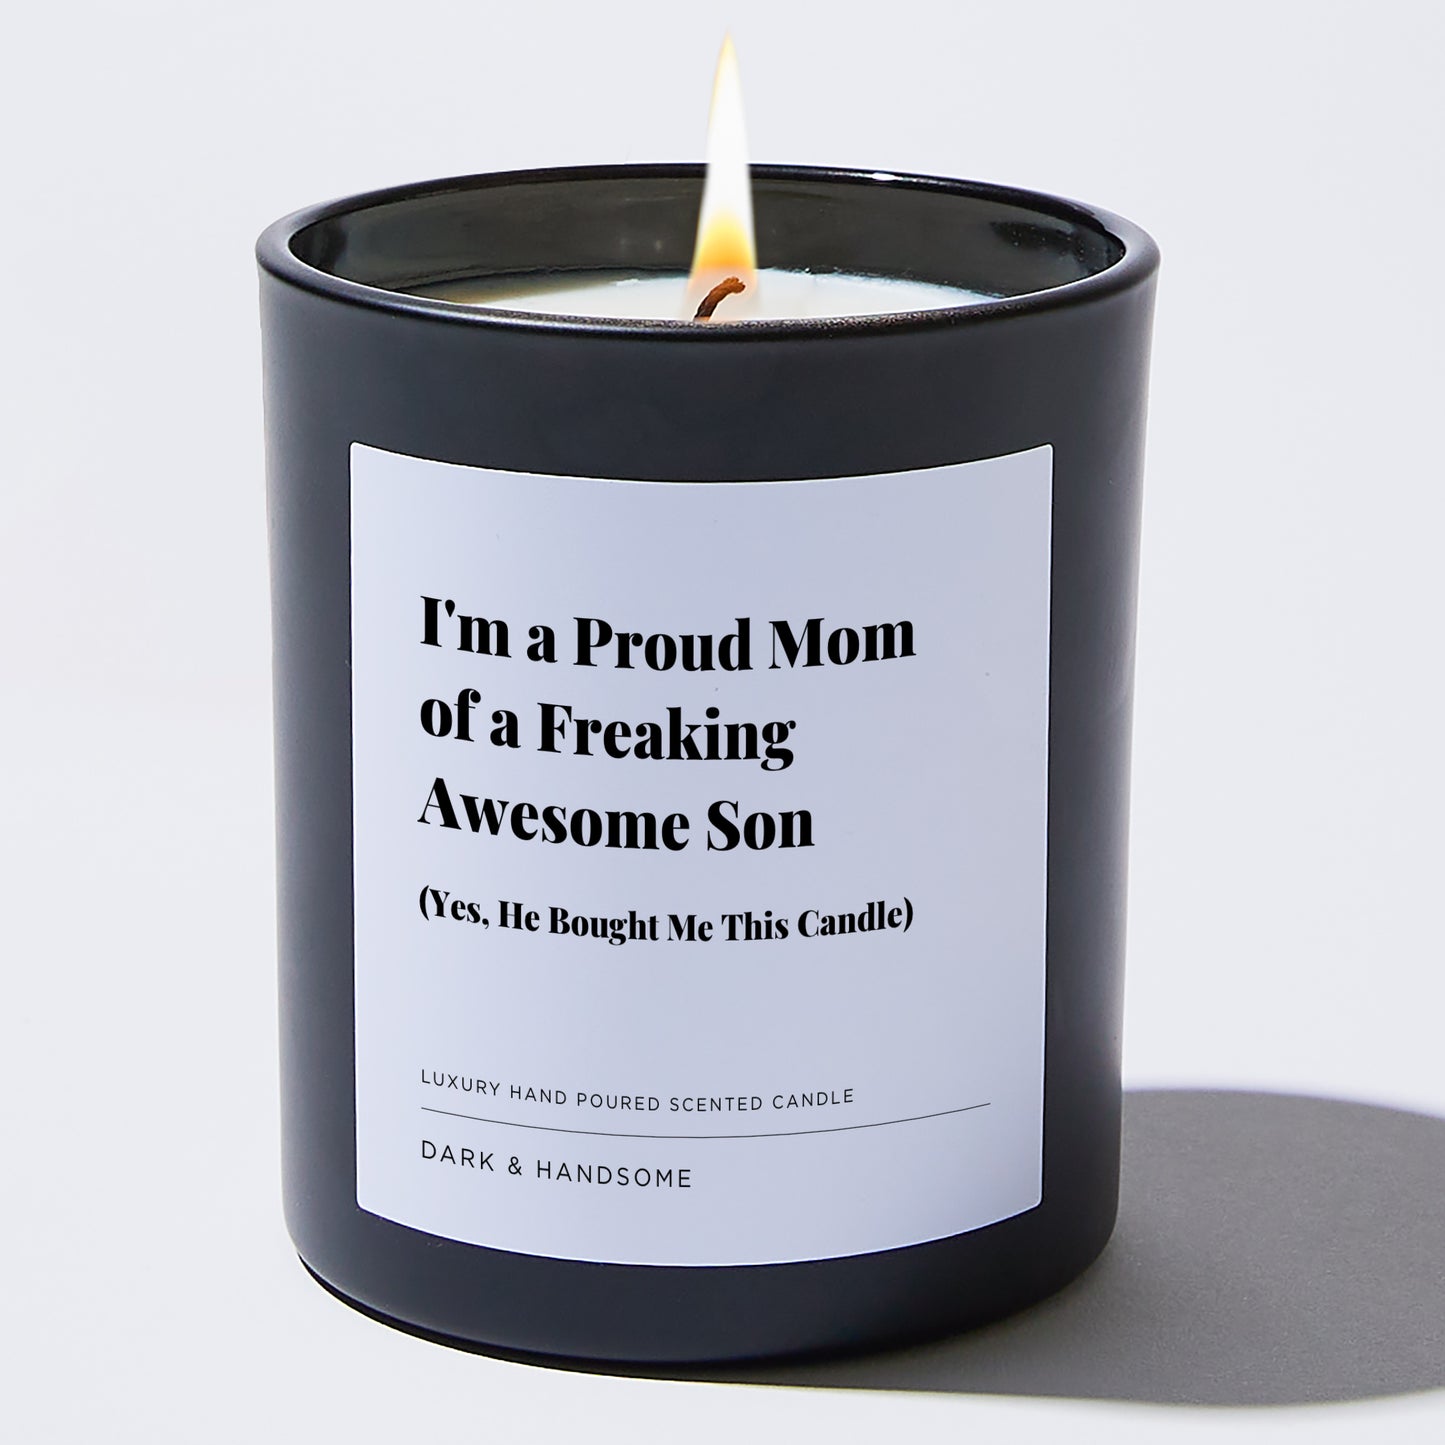 Gift for Mom - I'm a Proud Mom of a Freaking Awesome Son (yes, he bought me this candle) - Candle